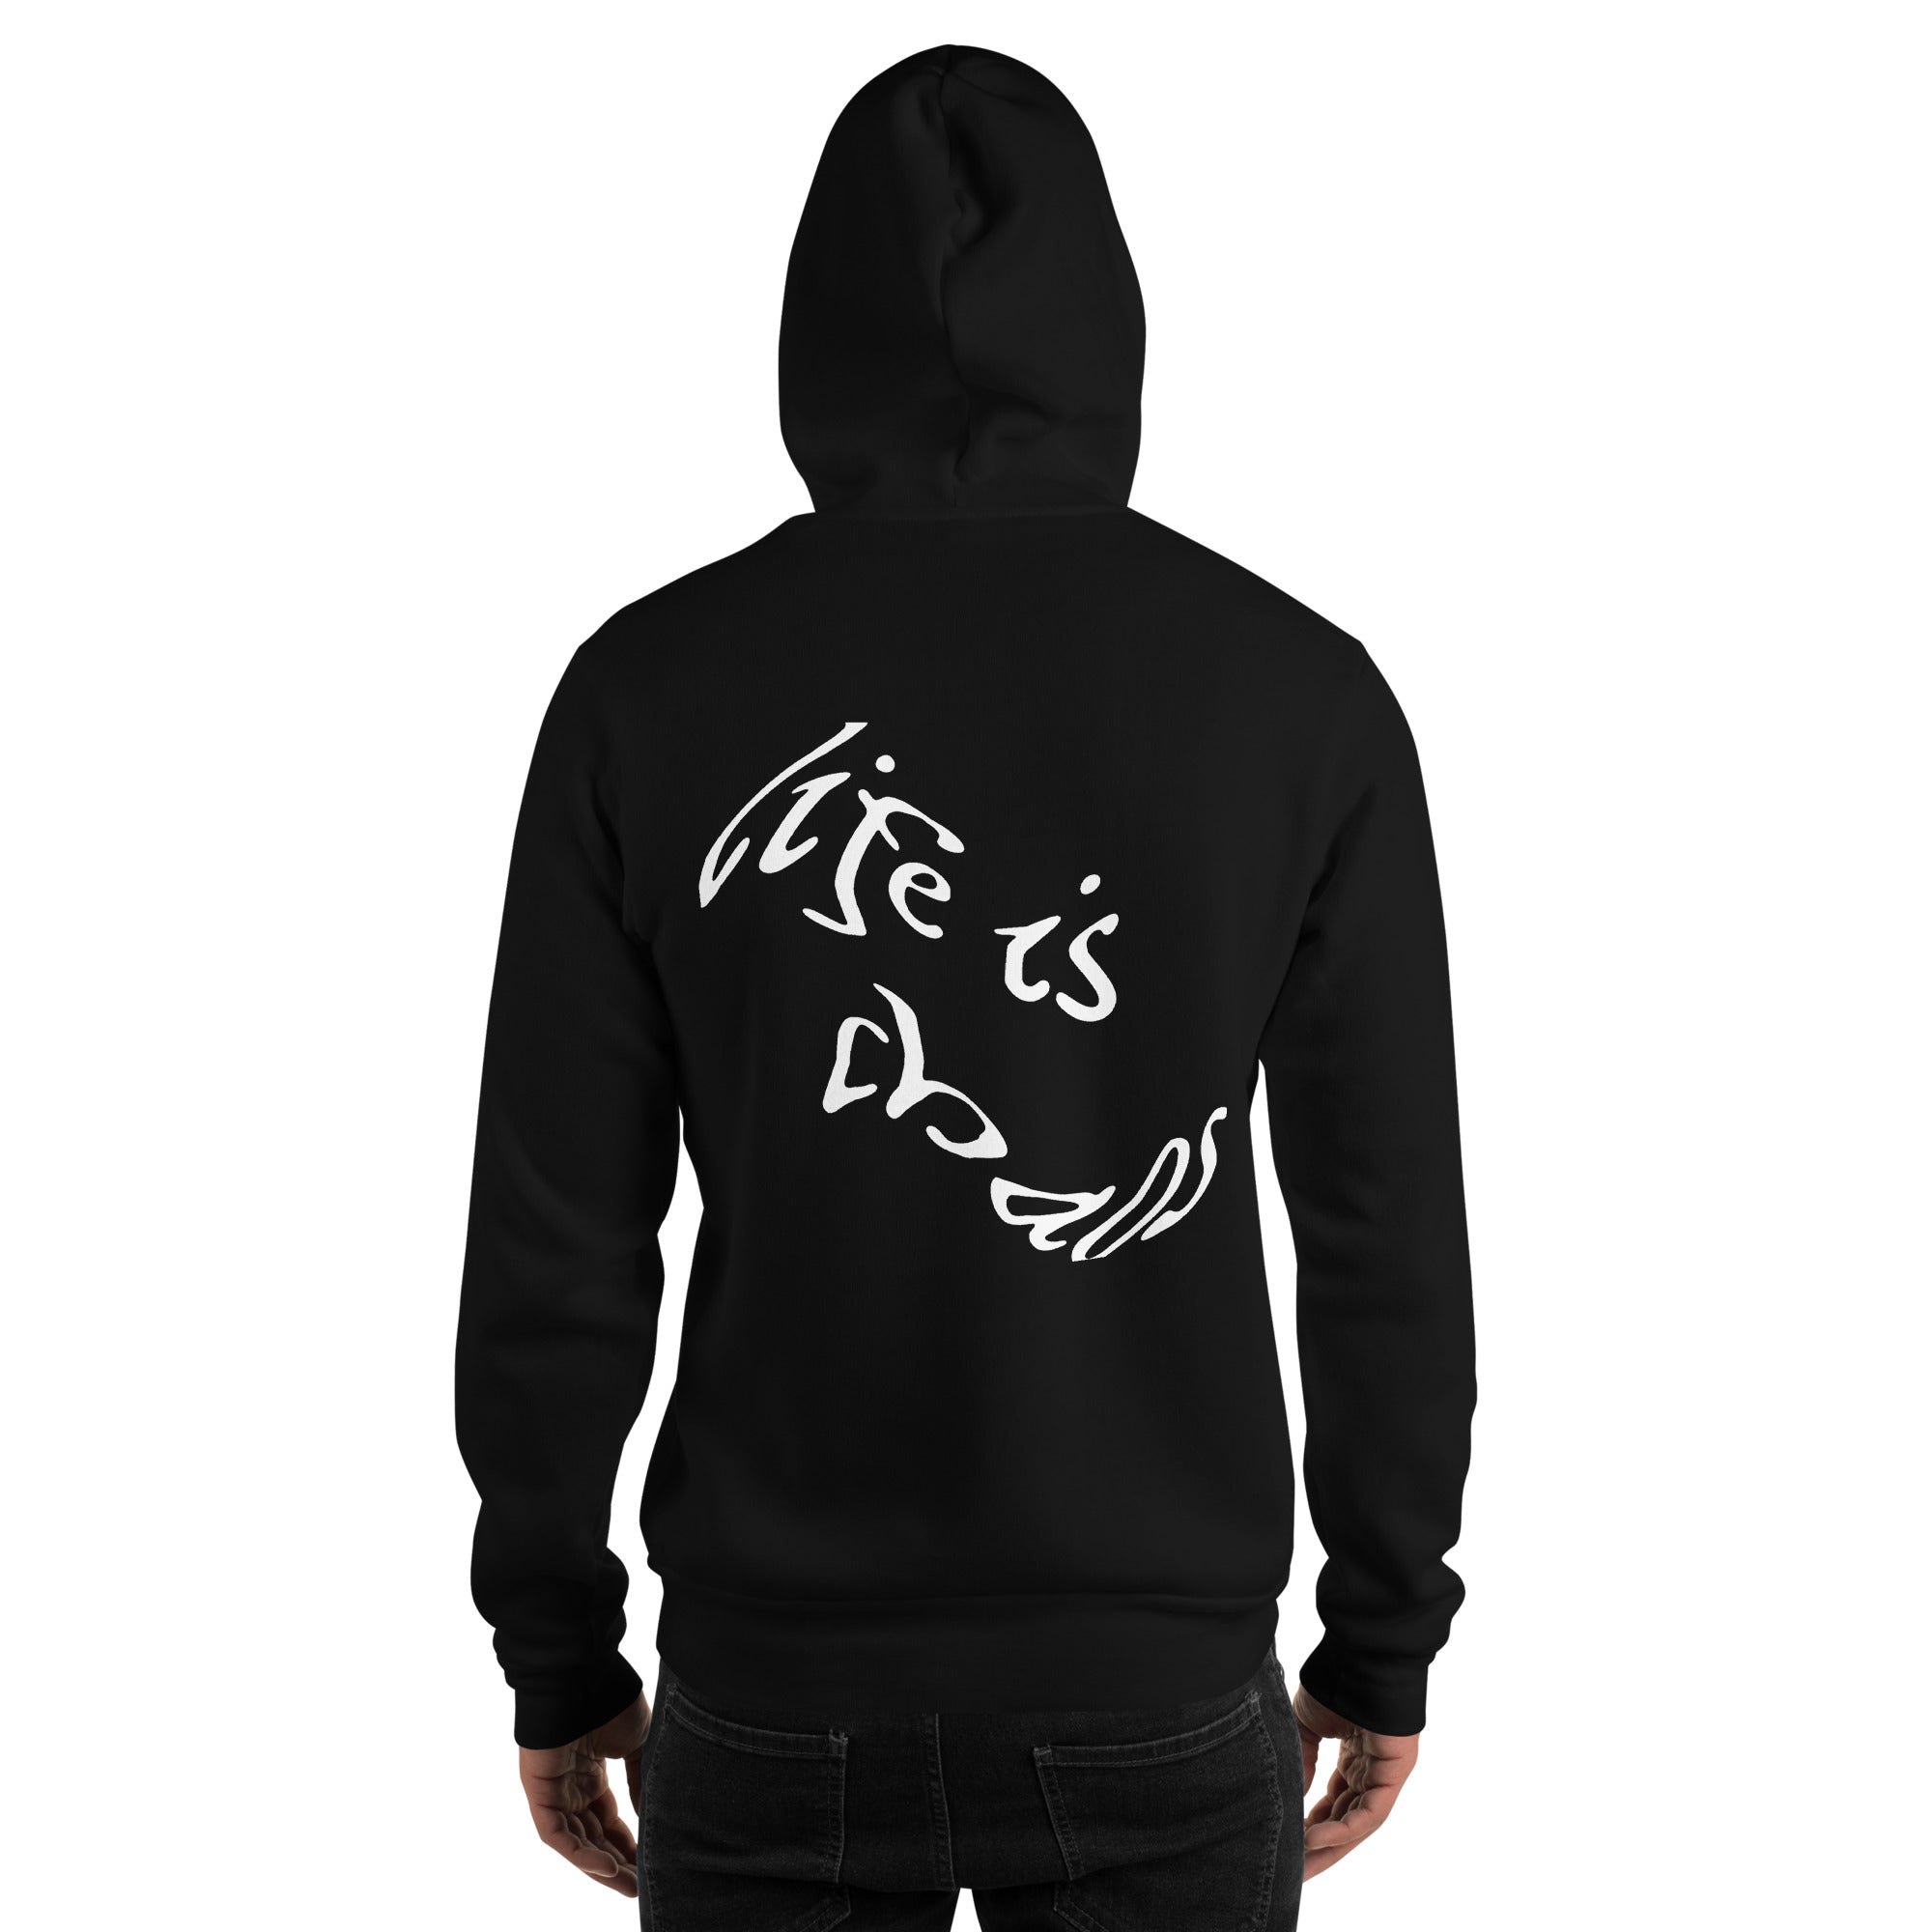 LIFE IS CHAOS® Hoodie